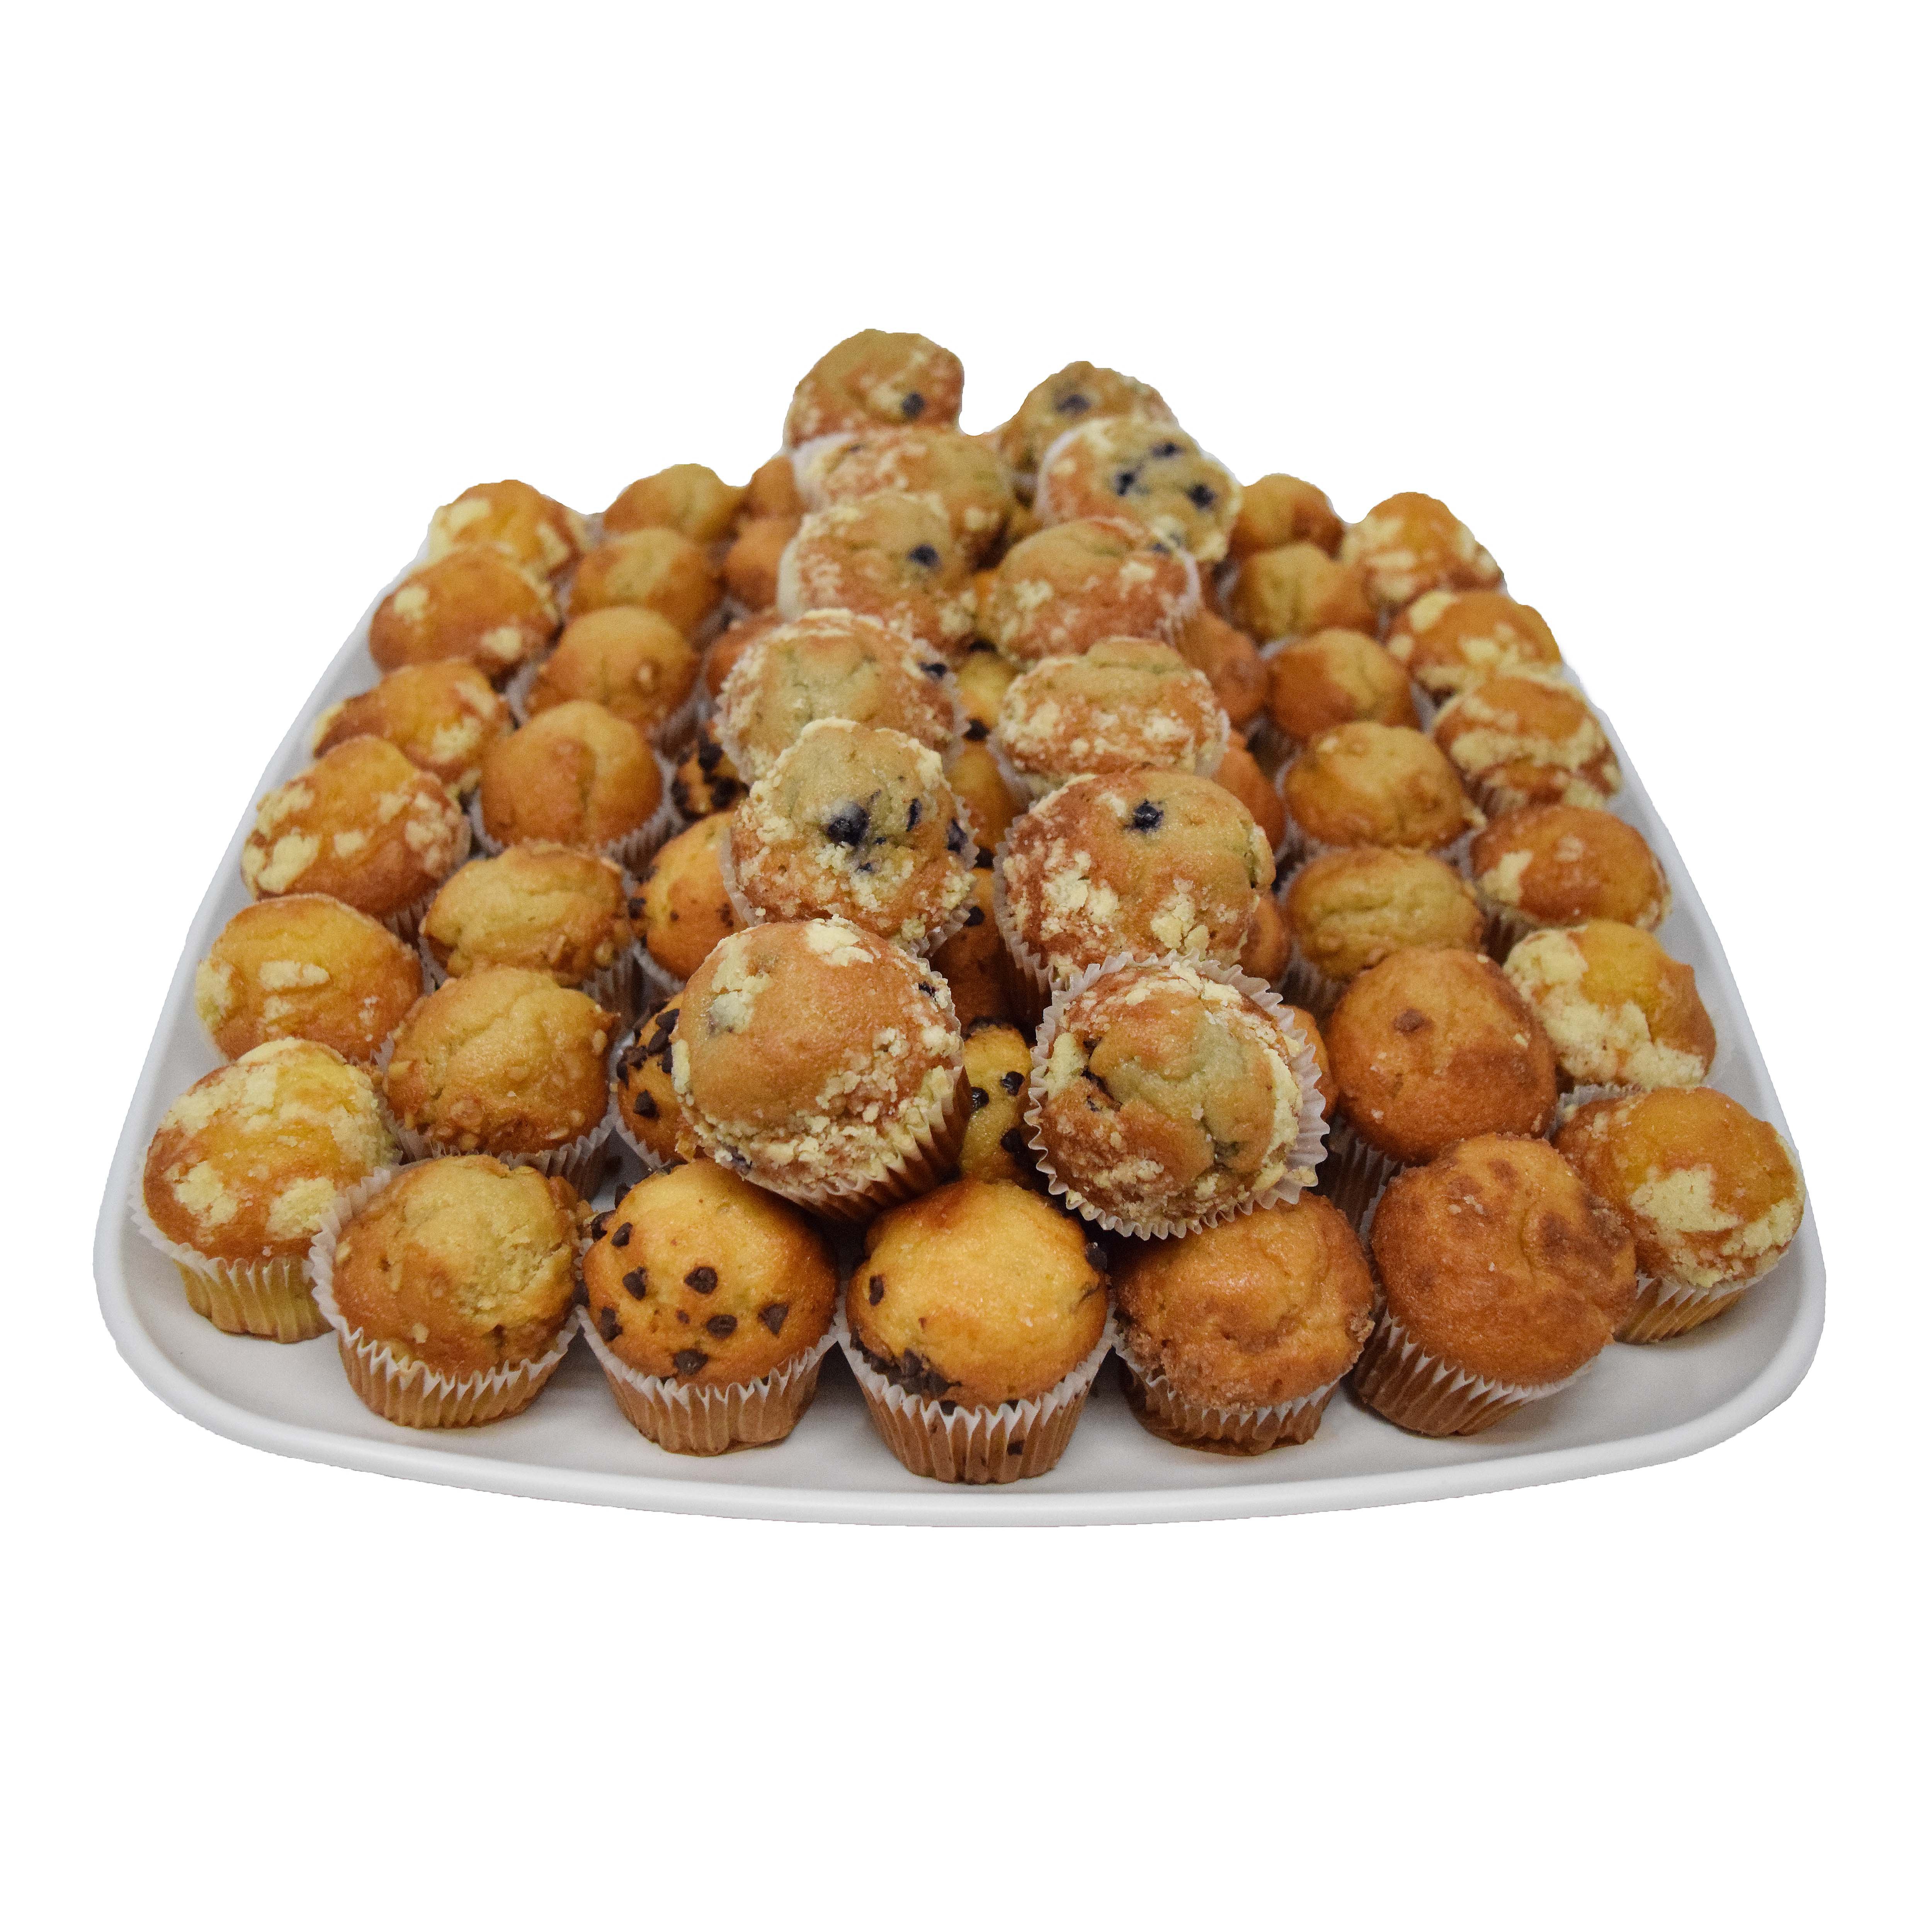 H-E-B Bakery Party Tray Shop Party Mini at Trays Muffins Standard H-E-B - 